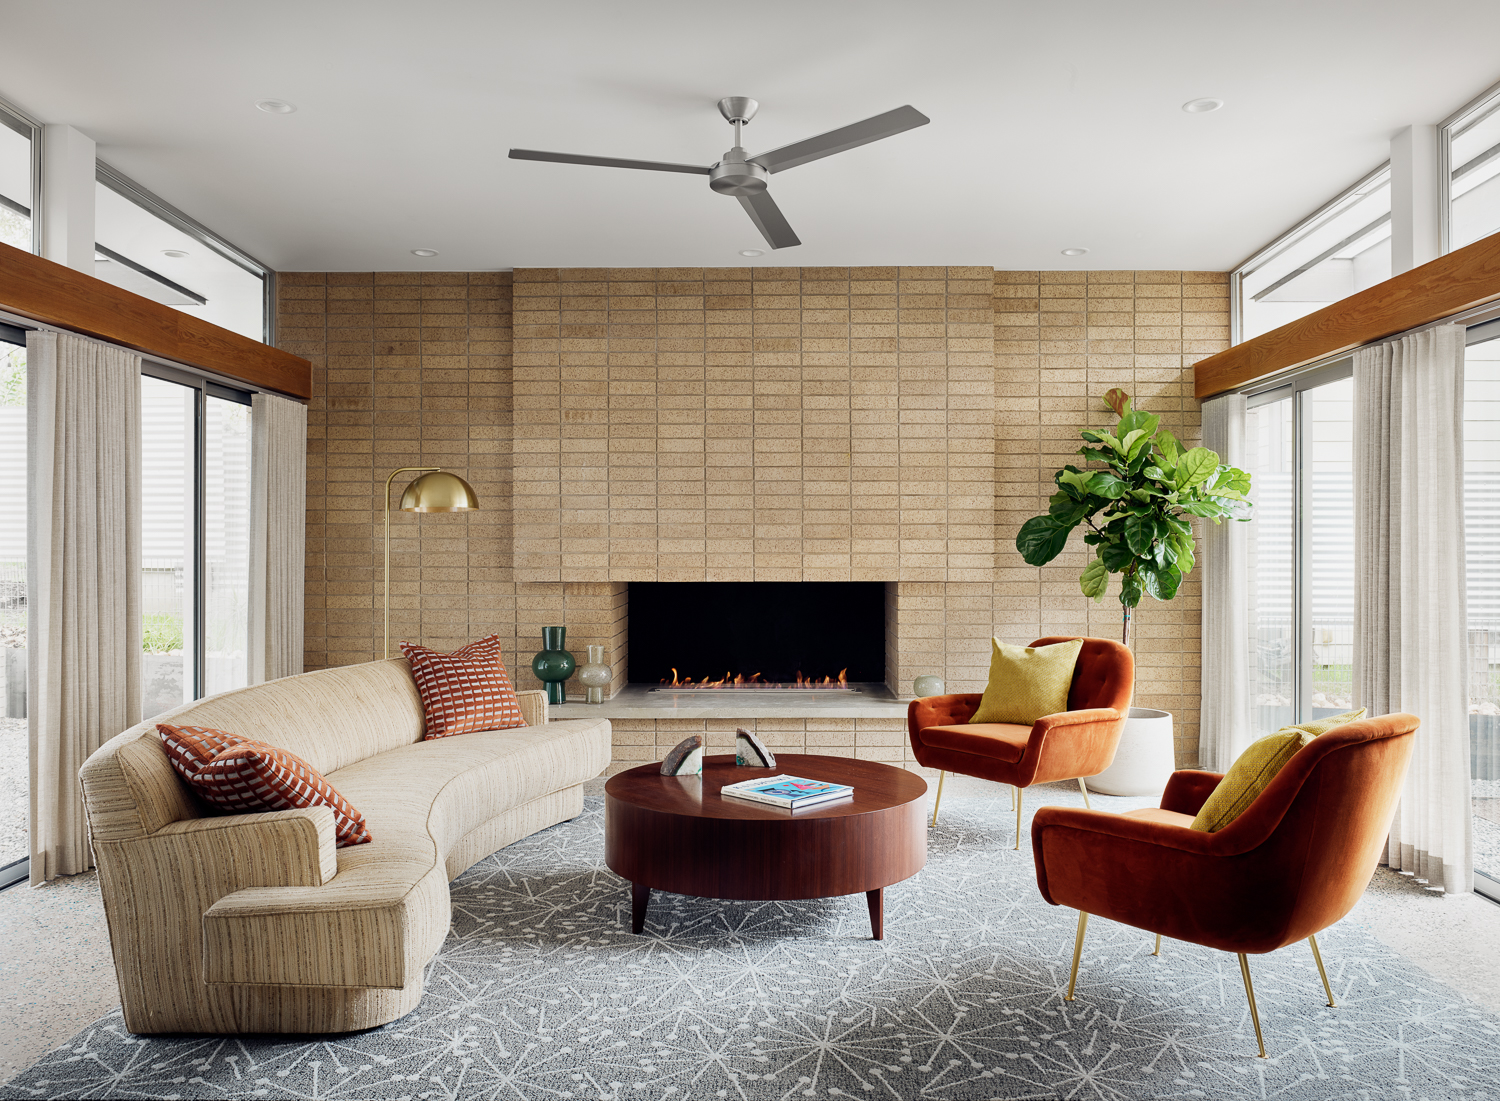 Photo of living room featuring brick fireplace and midcentury furniture.